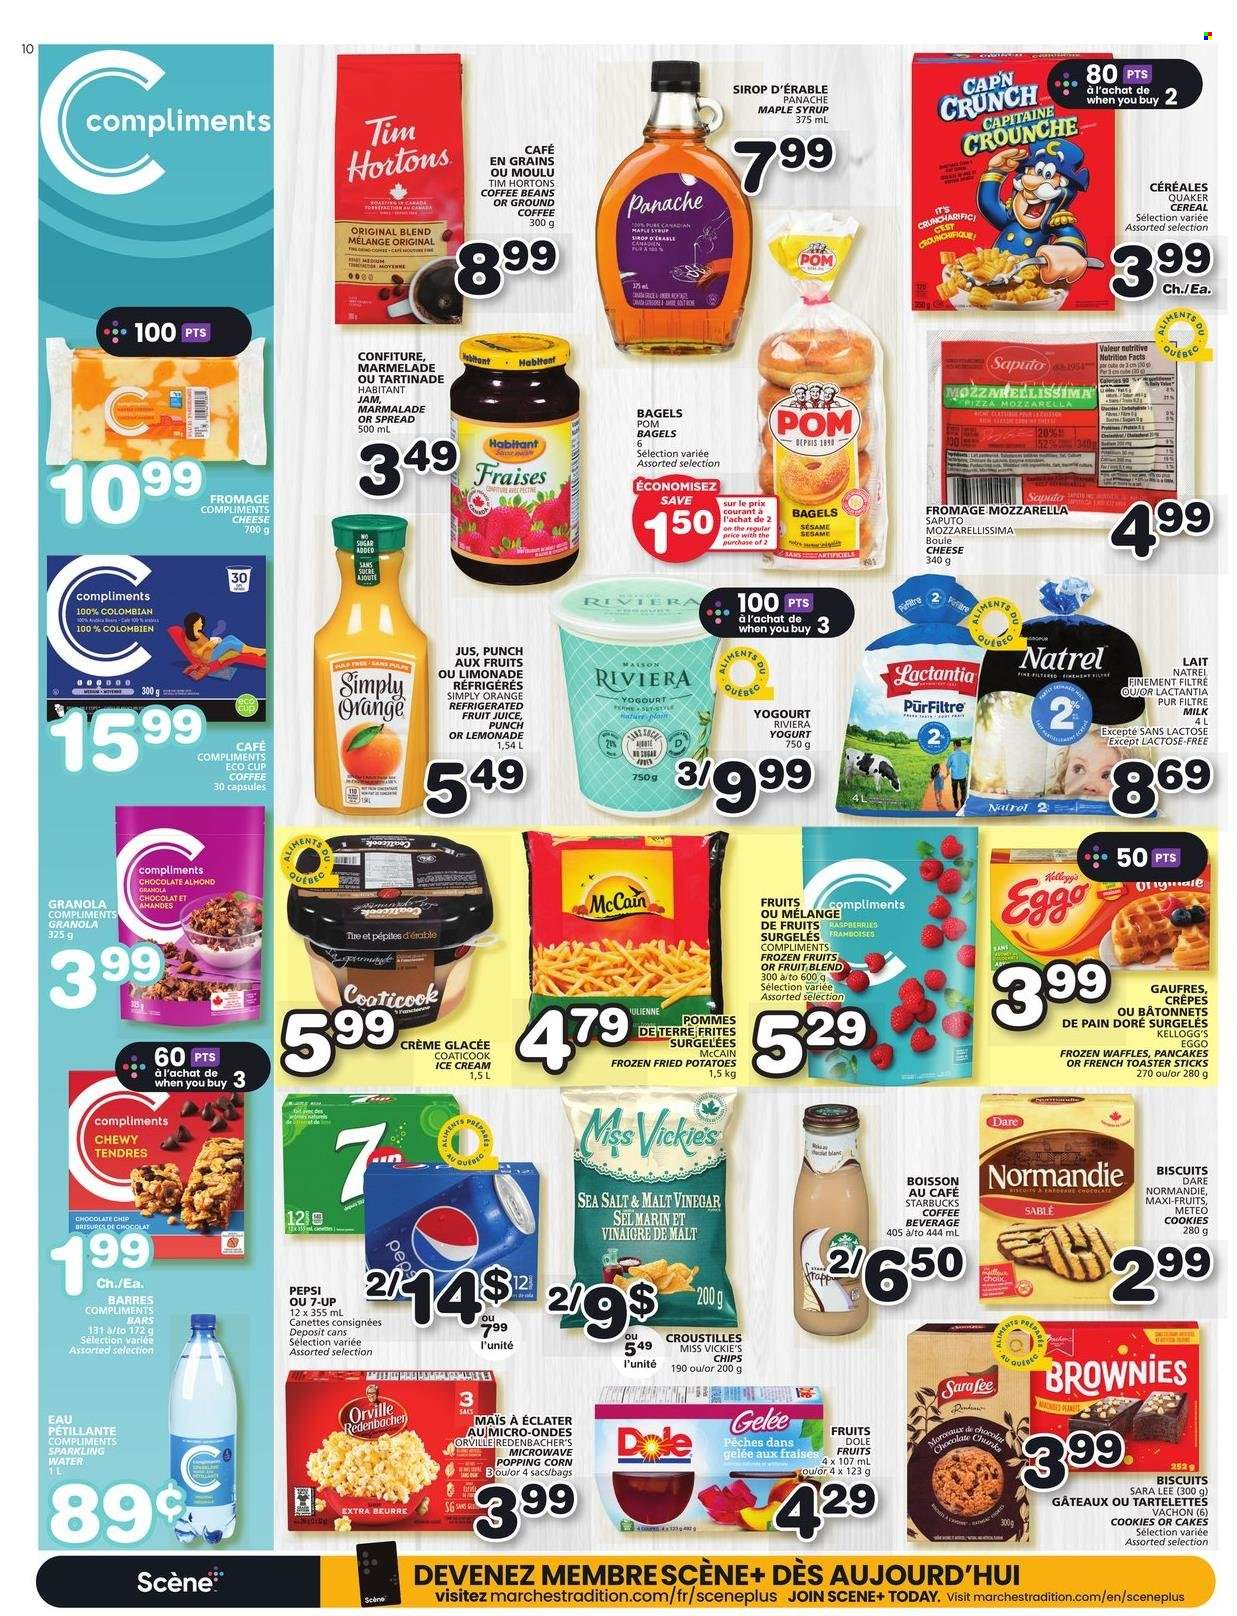 thumbnail - Les Marchés Tradition Flyer - March 23, 2023 - March 29, 2023 - Sales products - bagels, cake, Sara Lee, brownies, waffles, corn, potatoes, Dole, pizza, Quaker, yoghurt, milk, ice cream, McCain, cookies, chocolate chips, Kellogg's, biscuit, sugar, cereals, maple syrup, fruit jam, syrup, lemonade, Pepsi, juice, fruit juice, 7UP, sparkling water, water, coffee beans, ground coffee, Starbucks, punch, Natrol, granola. Page 6.